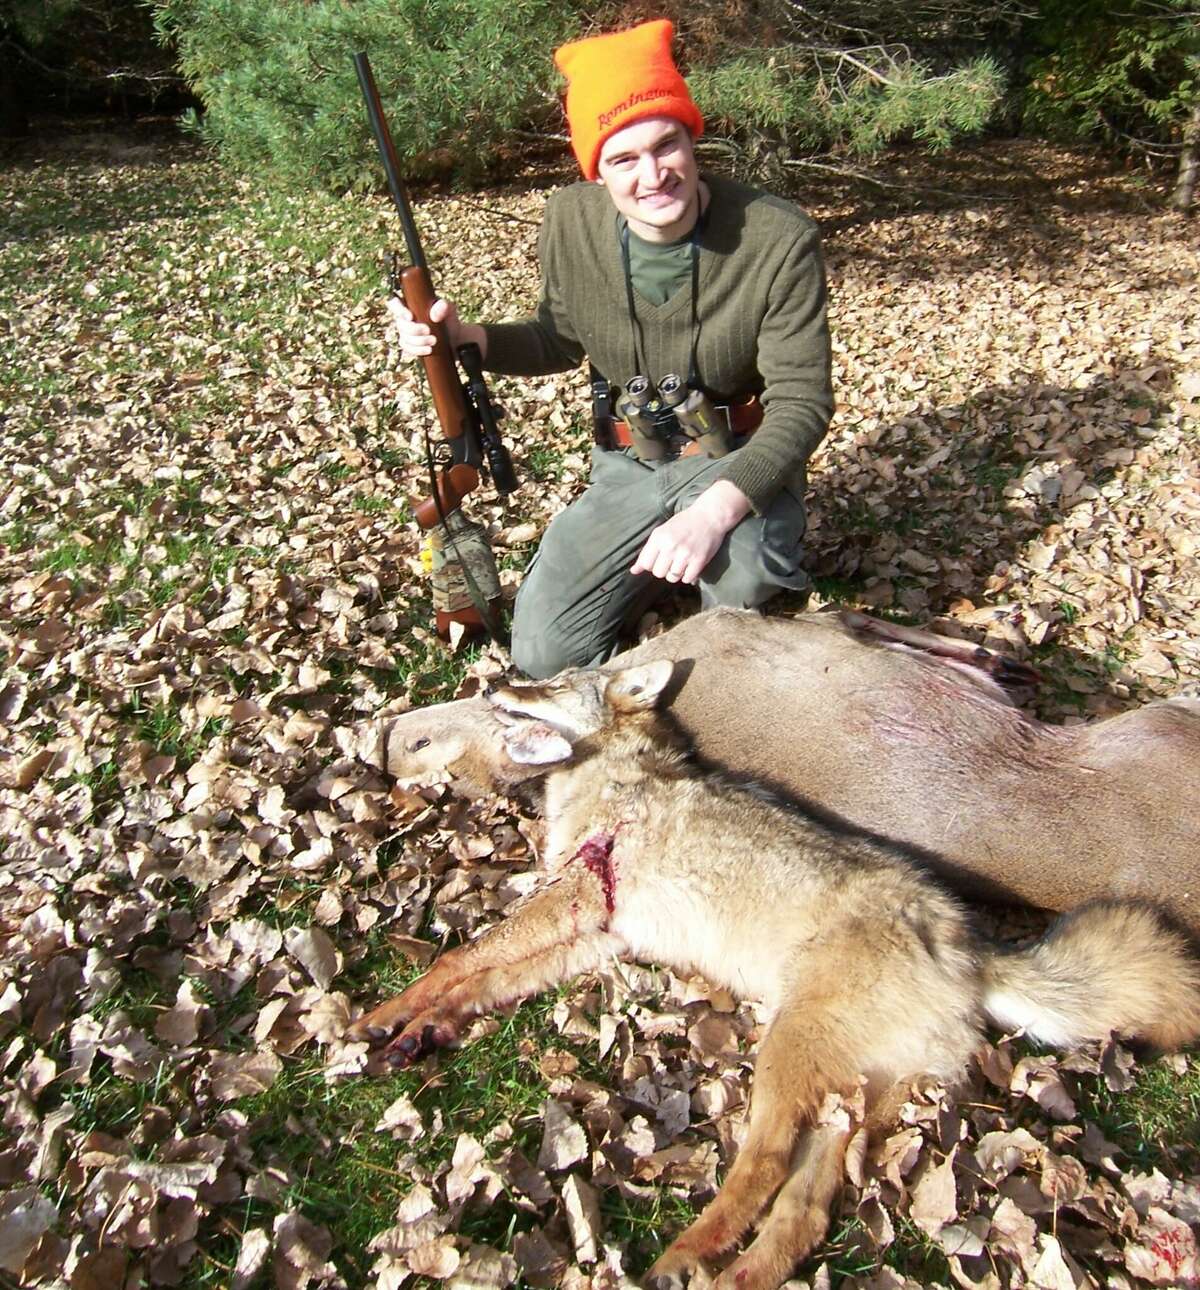 Josh Lounsbury shows the Thumb coyote and doe that he shot within seconds of each other on the opening morning of the 2009 firearm deer season.